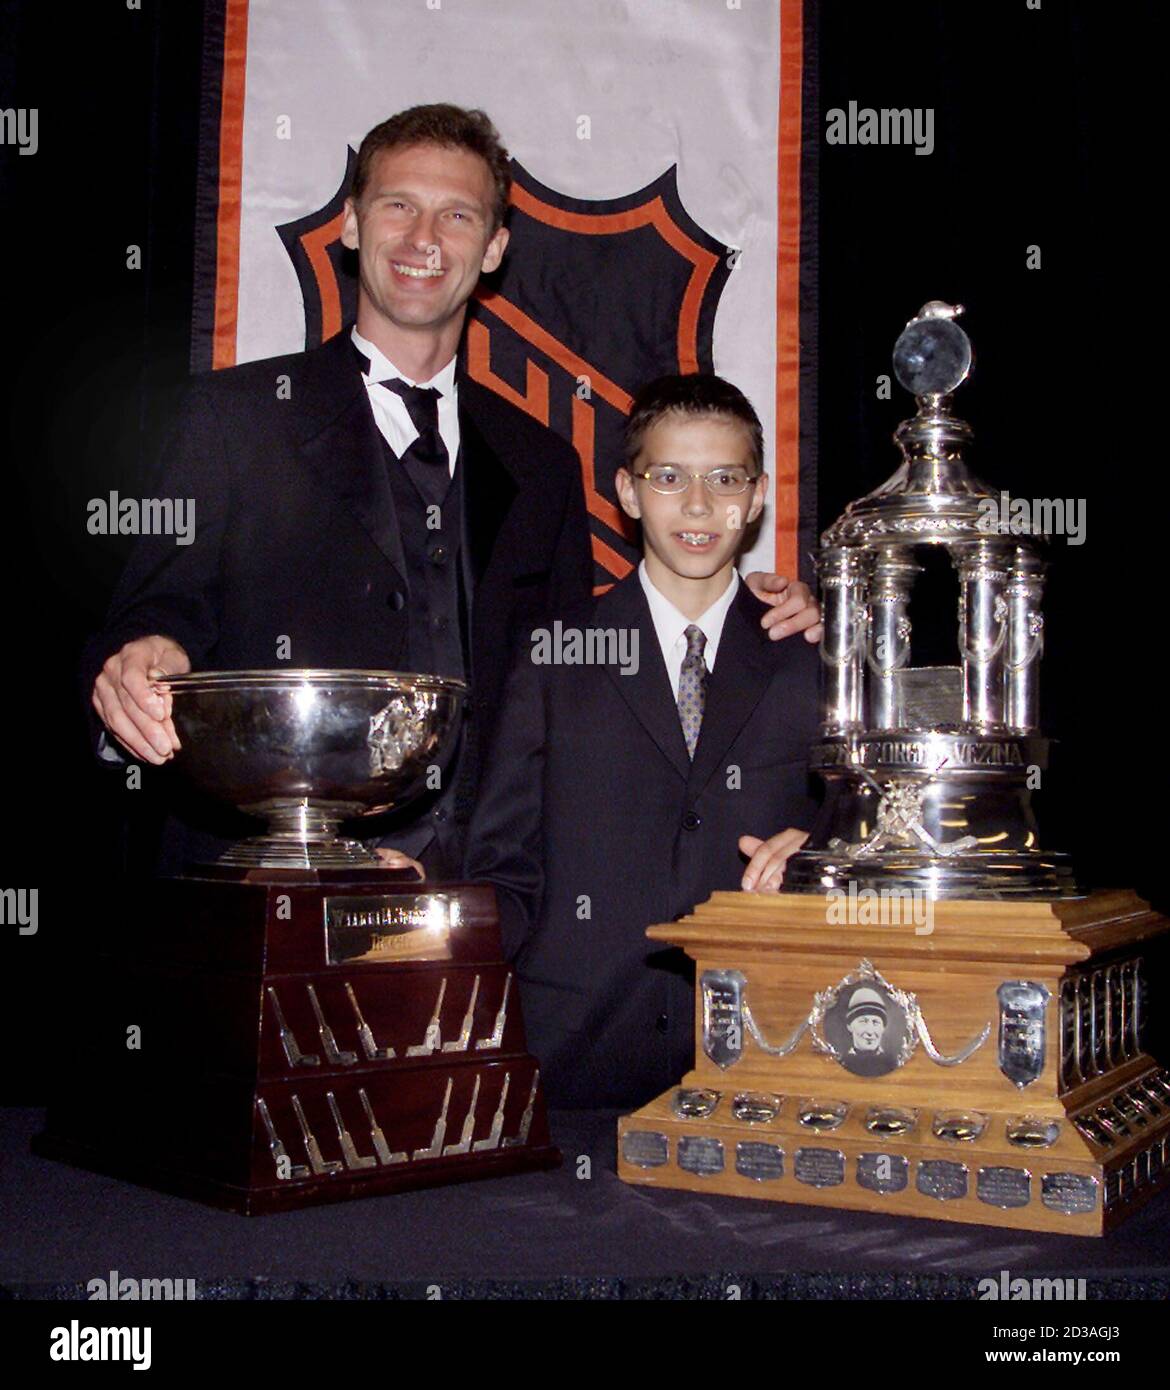 Buffalo Sabres goalie Dominik Hasek and his son Michael pose with Hasek's  National Hockey League awards during ceremonies in Toronto June 14, 2001.  Hasek won the Vezina Trophy (R) and the Jennings